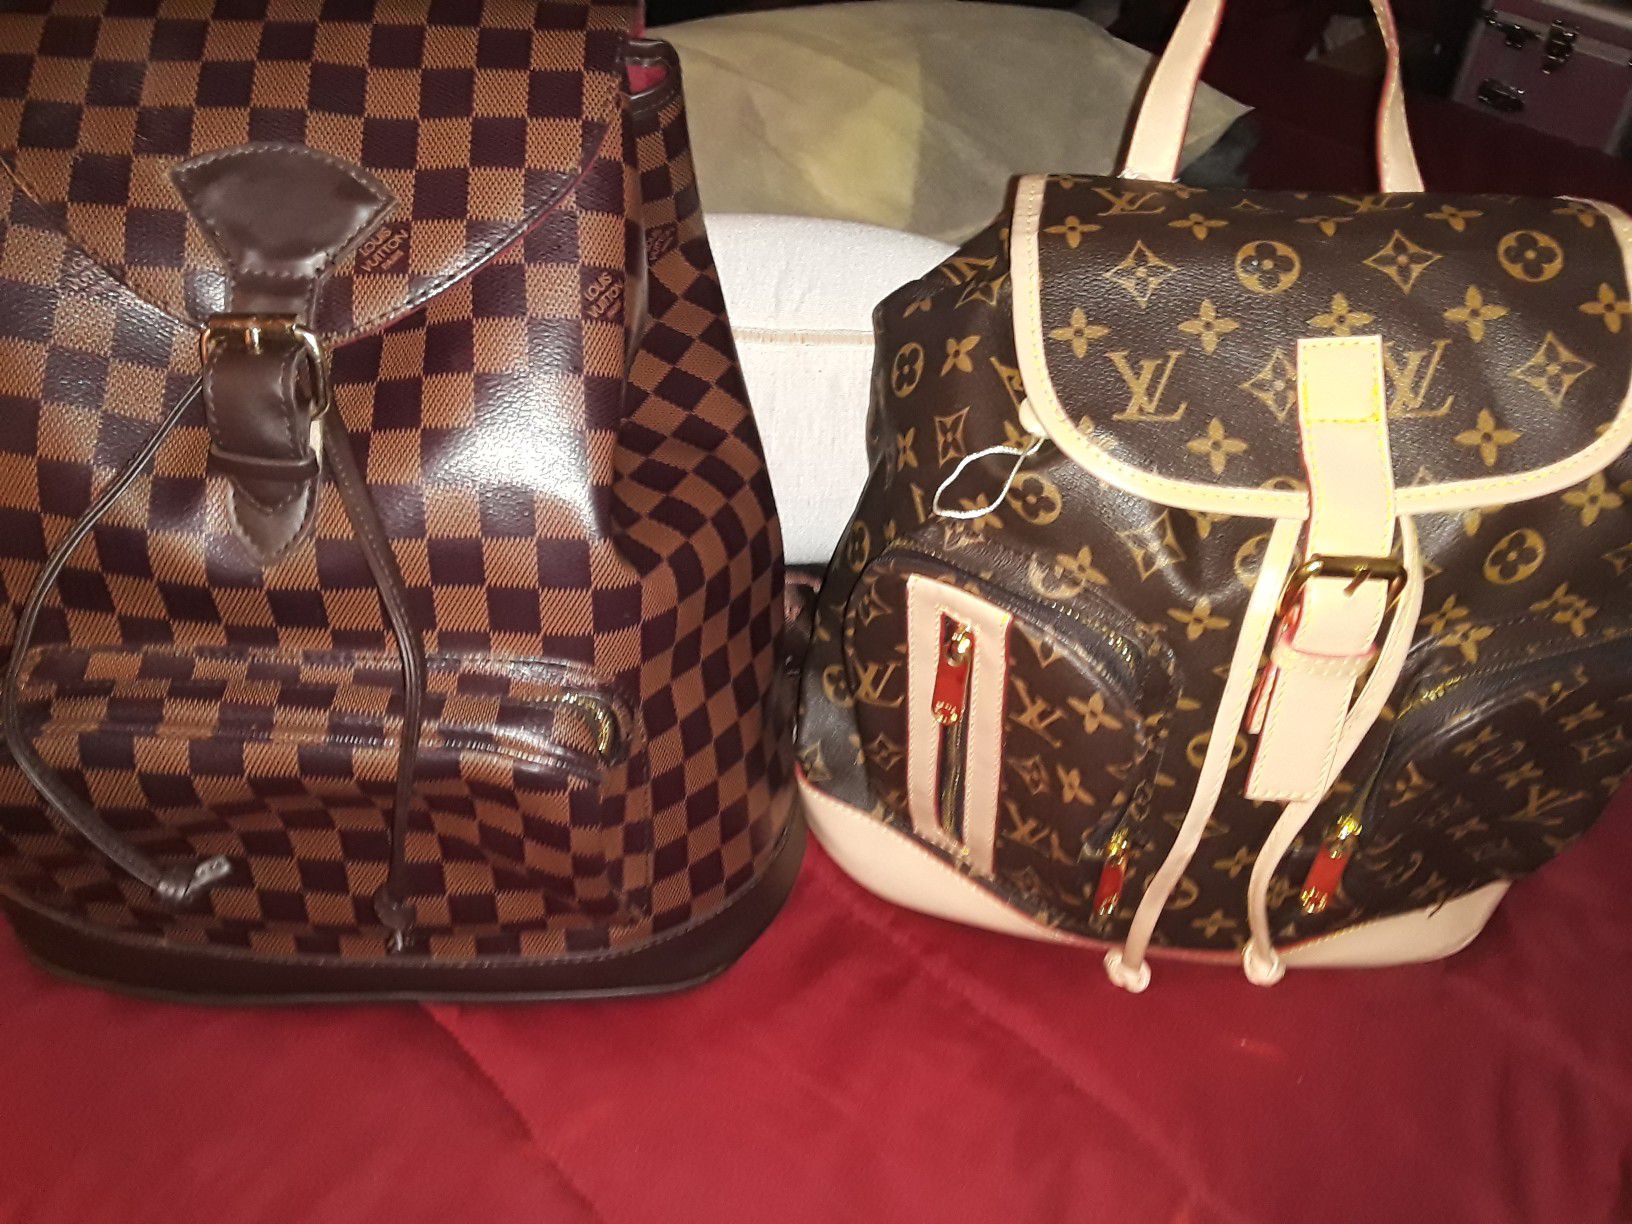 Fashion bags location 35 ave northern for Sale in Phoenix, AZ - OfferUp